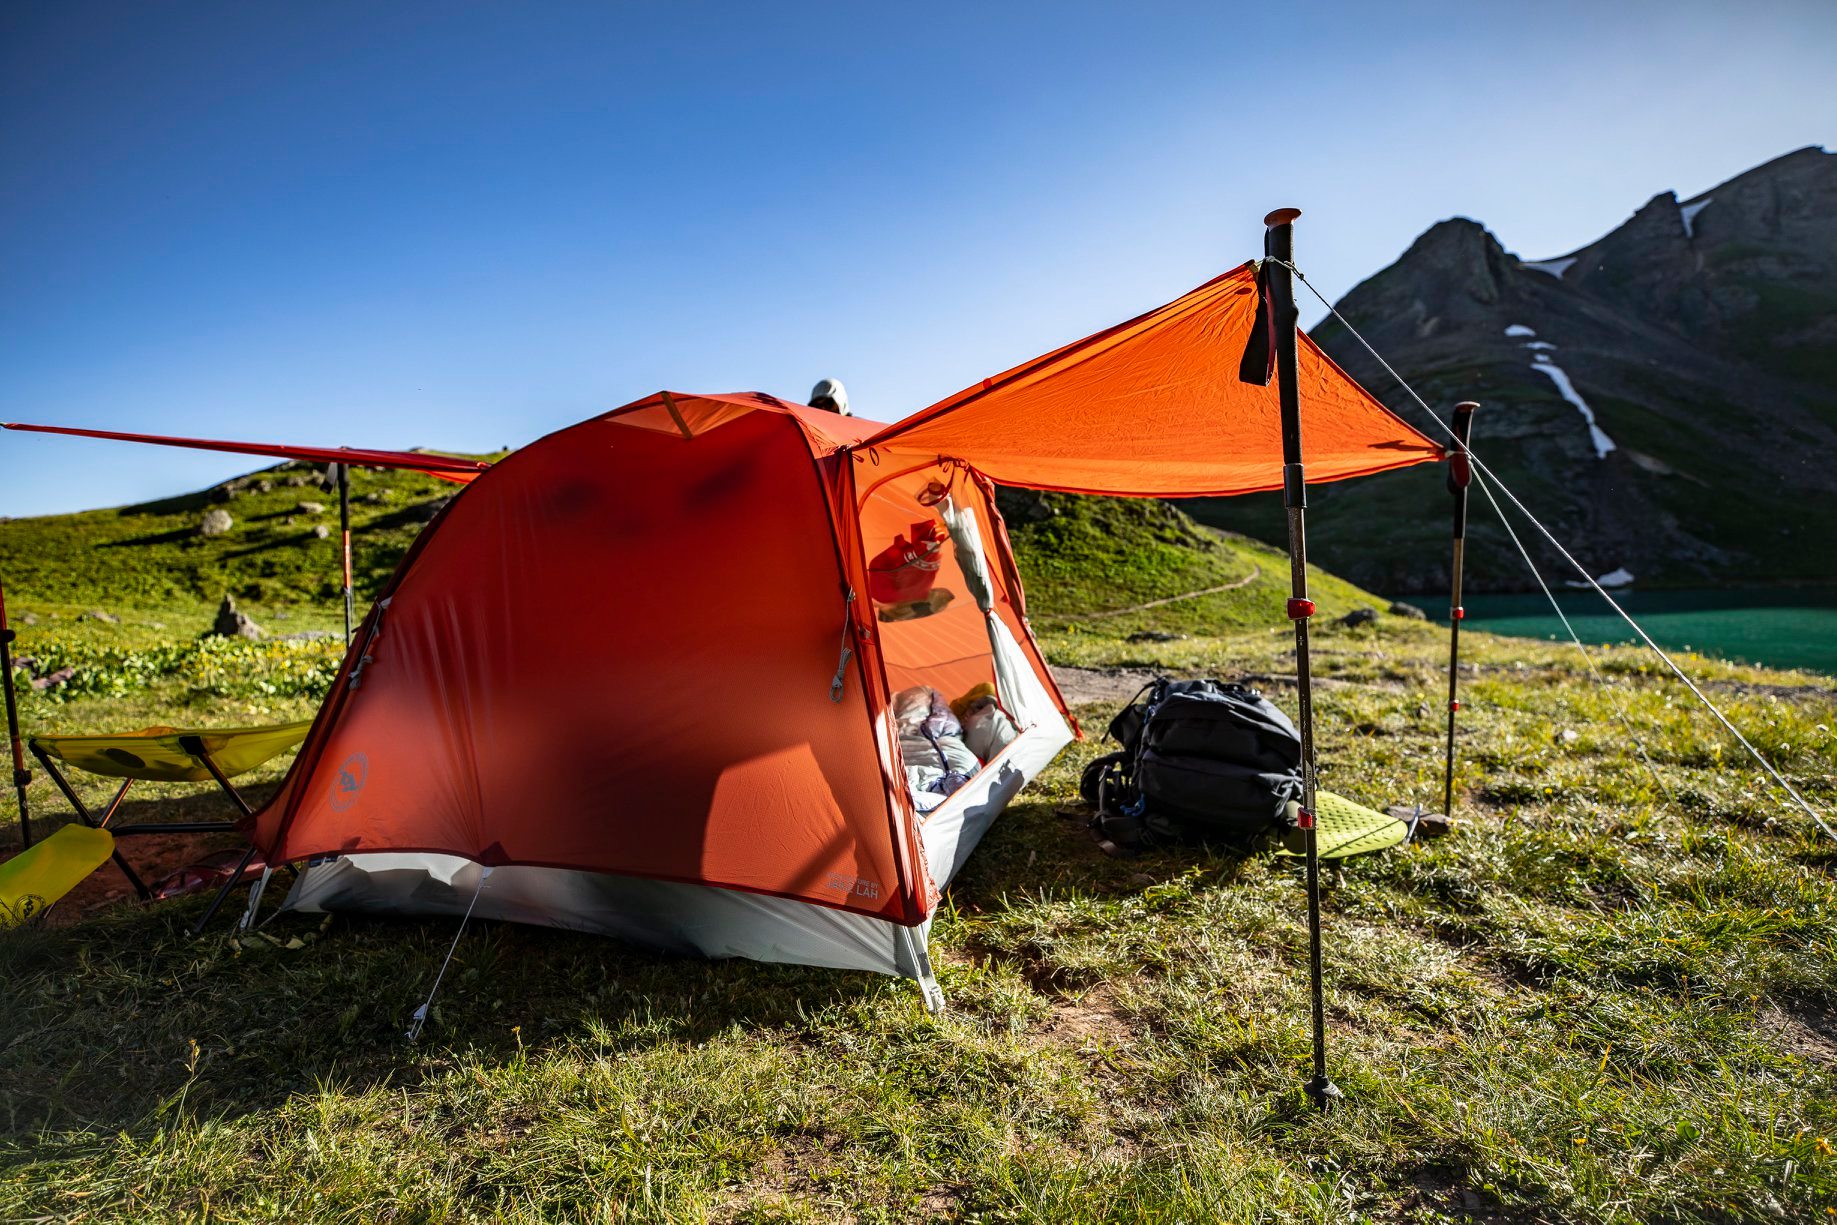 Camping Checklist: Our Top Gear and Pack Lists